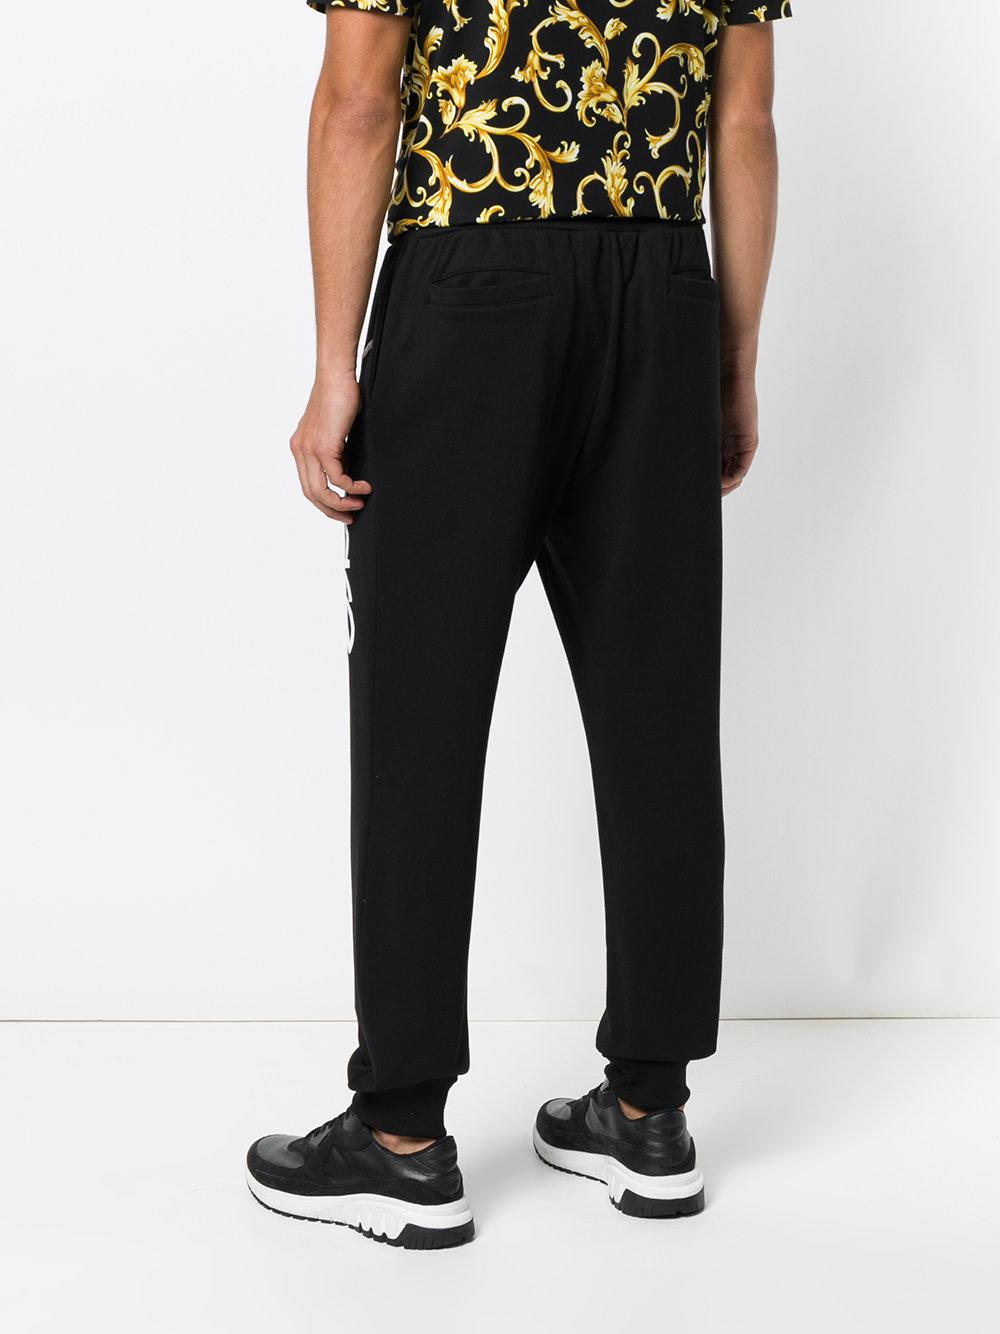 Versace Cotton Logo Track Pants in Black for Men - Lyst